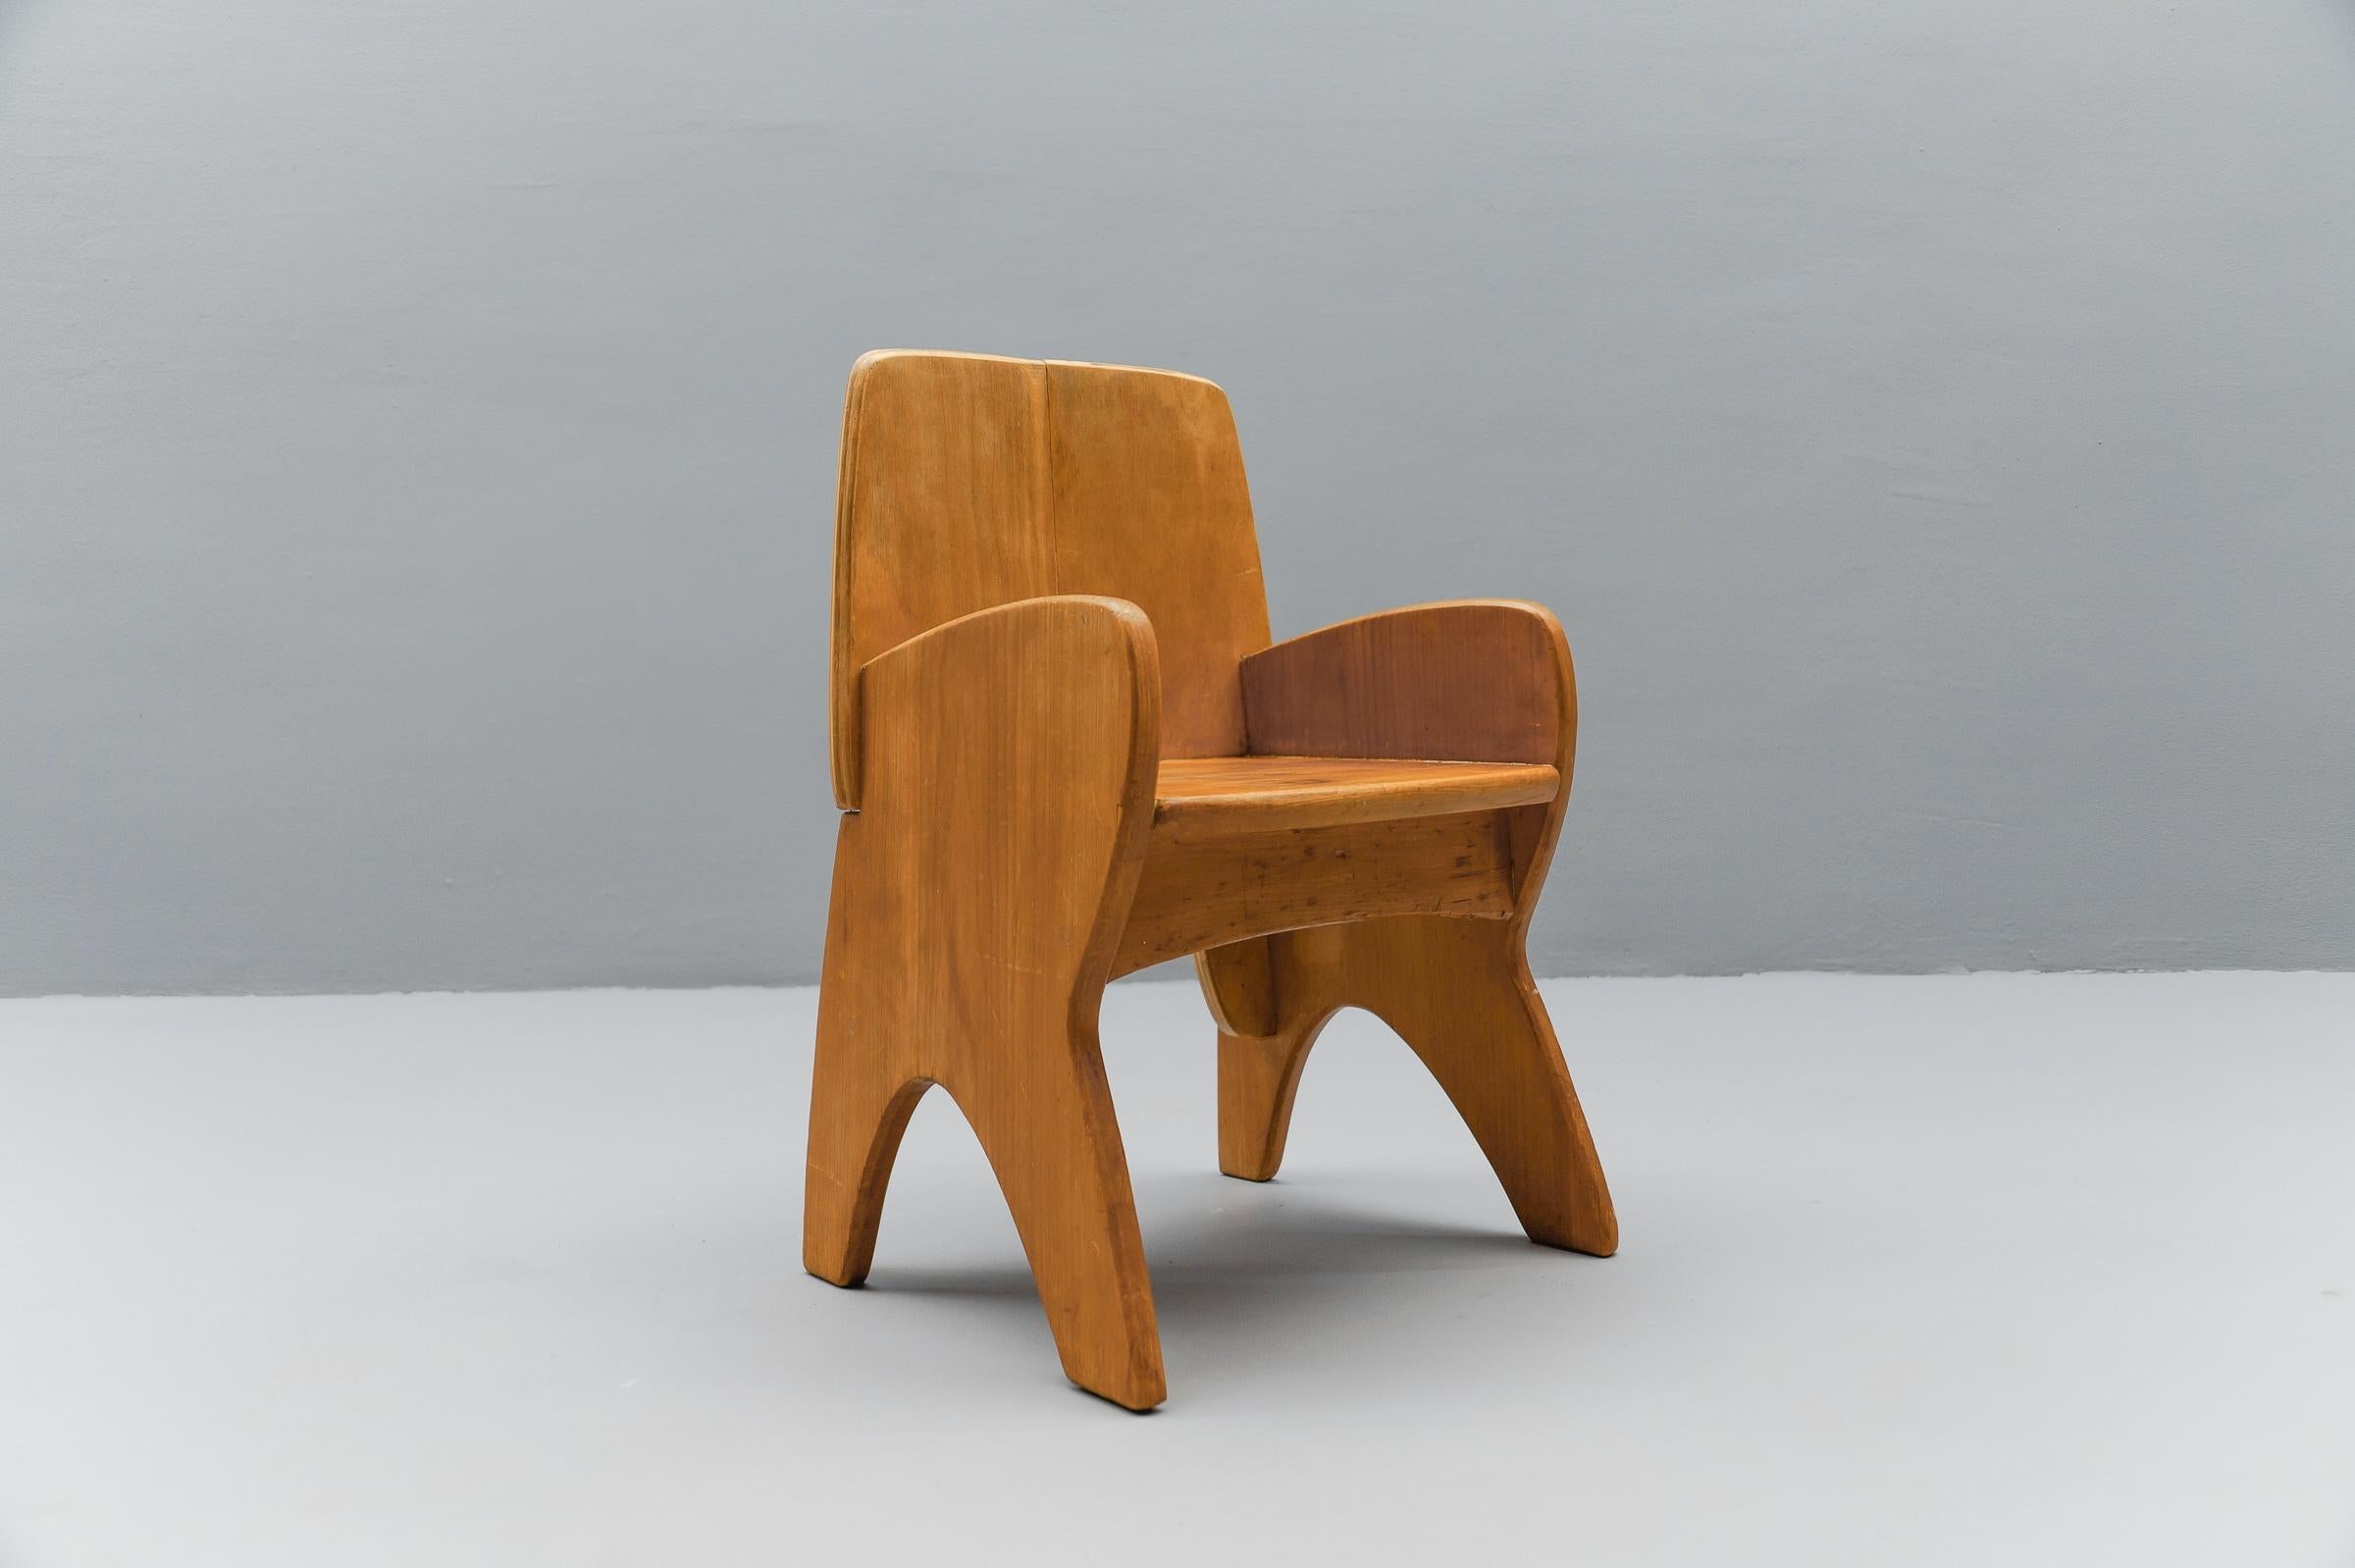 A shapely and expressive children's wooden chair brought from Scandinavia. 

We have only cleaned it, otherwise left in original condition with all its traces of use. We think that you can and should look at the chair its past.